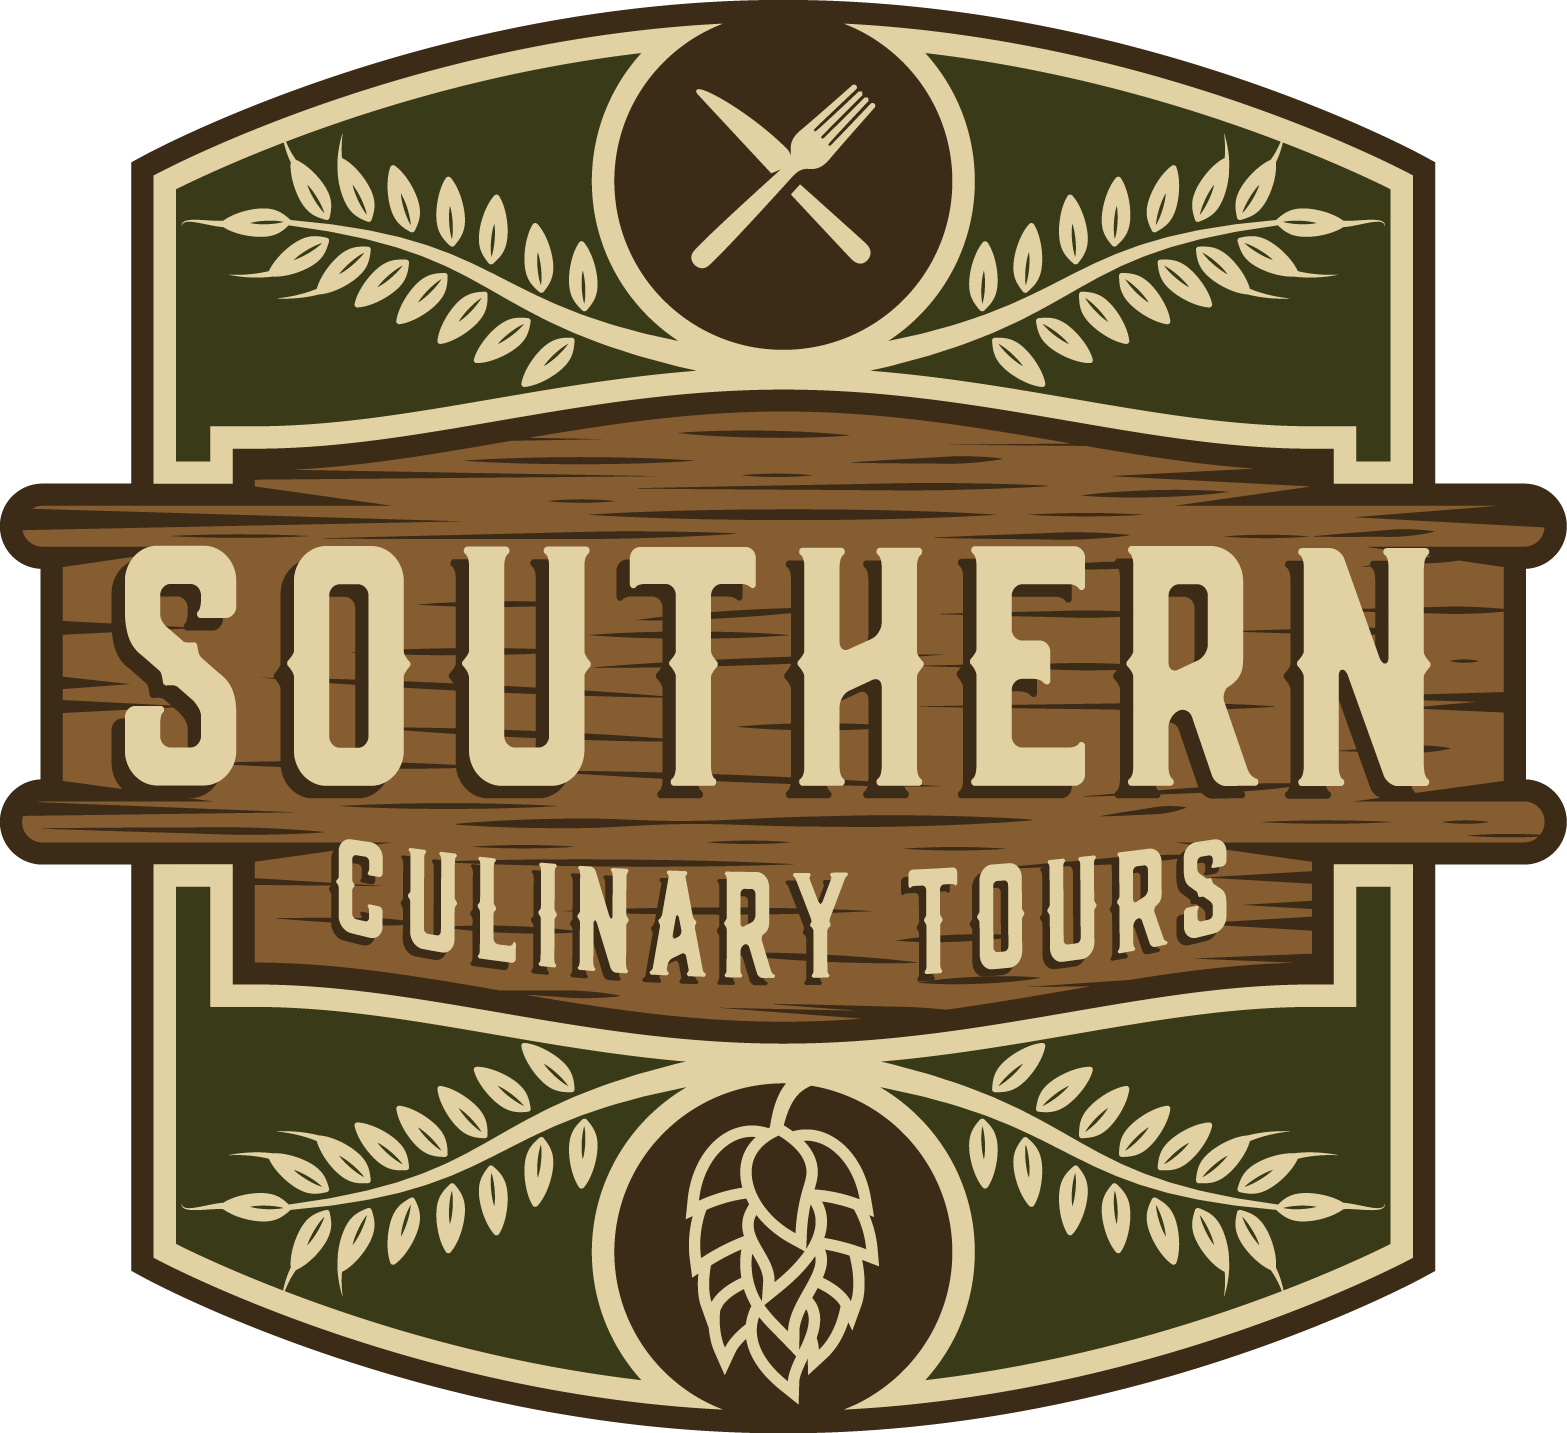 Southern Beer Tours Rebrands as Southern Culinary Tours